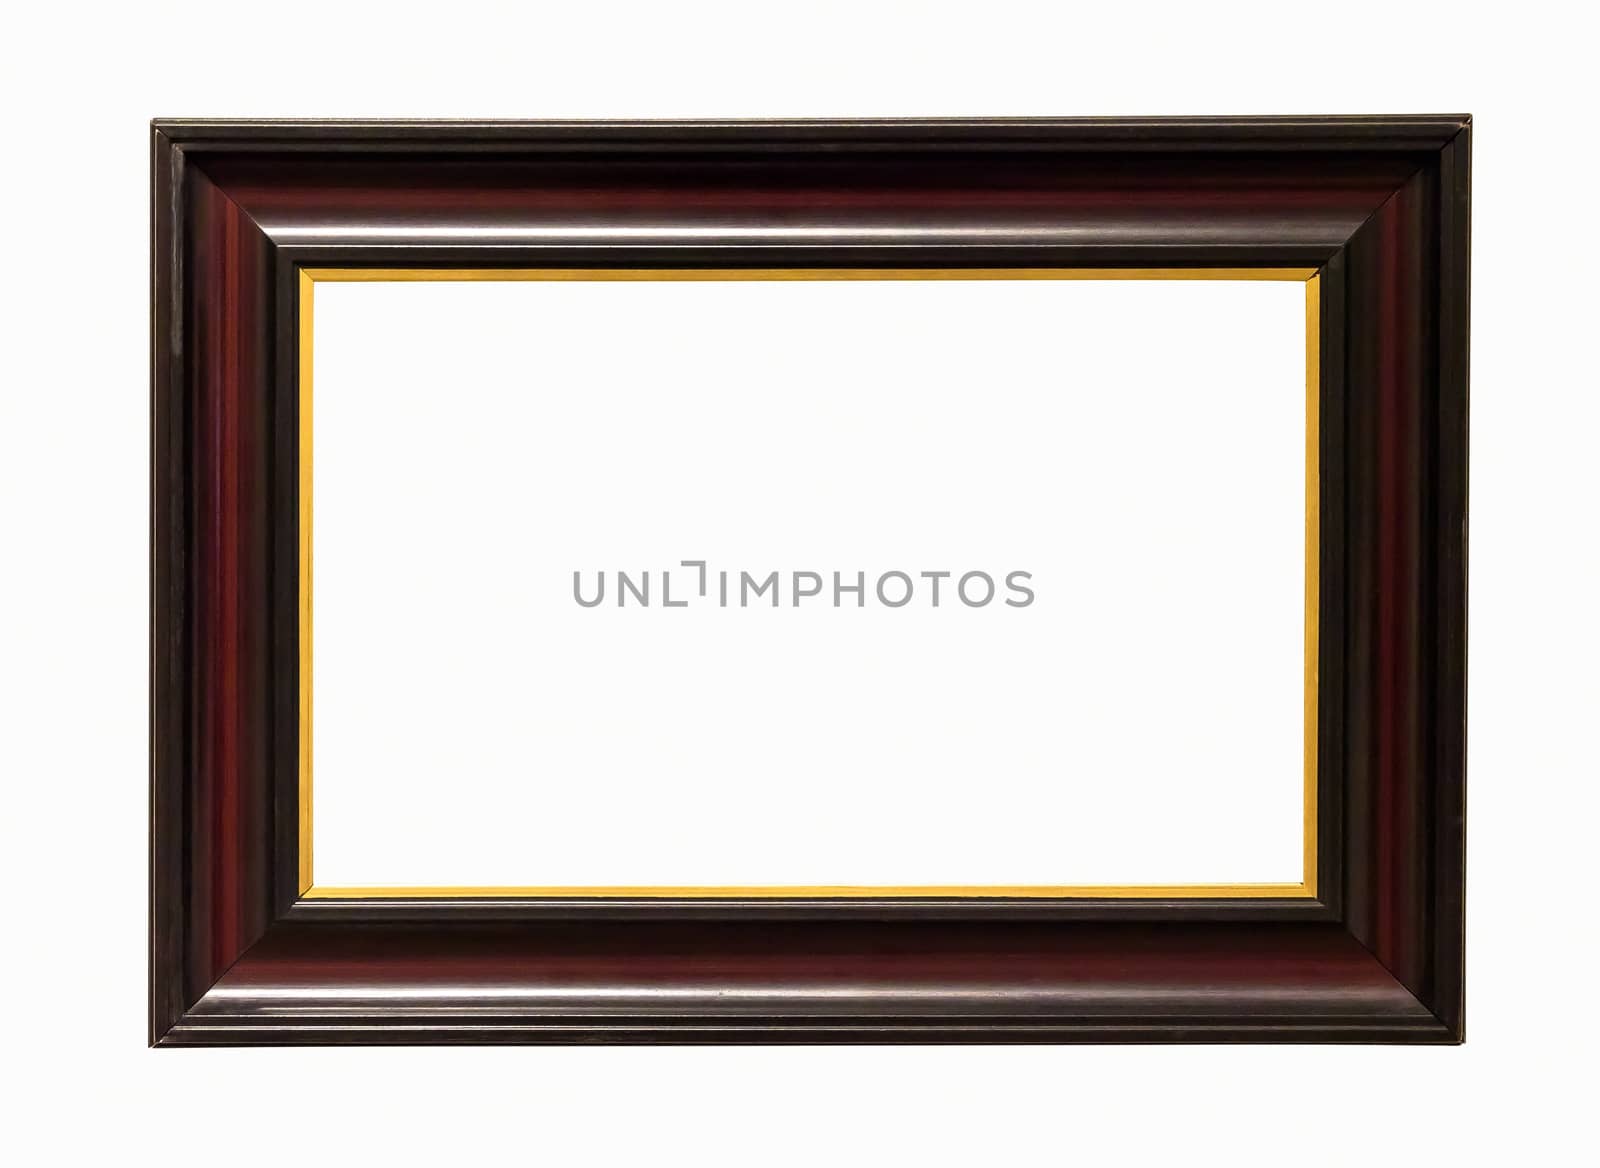 Dark wooden picture frame isolated on white background with clipping path